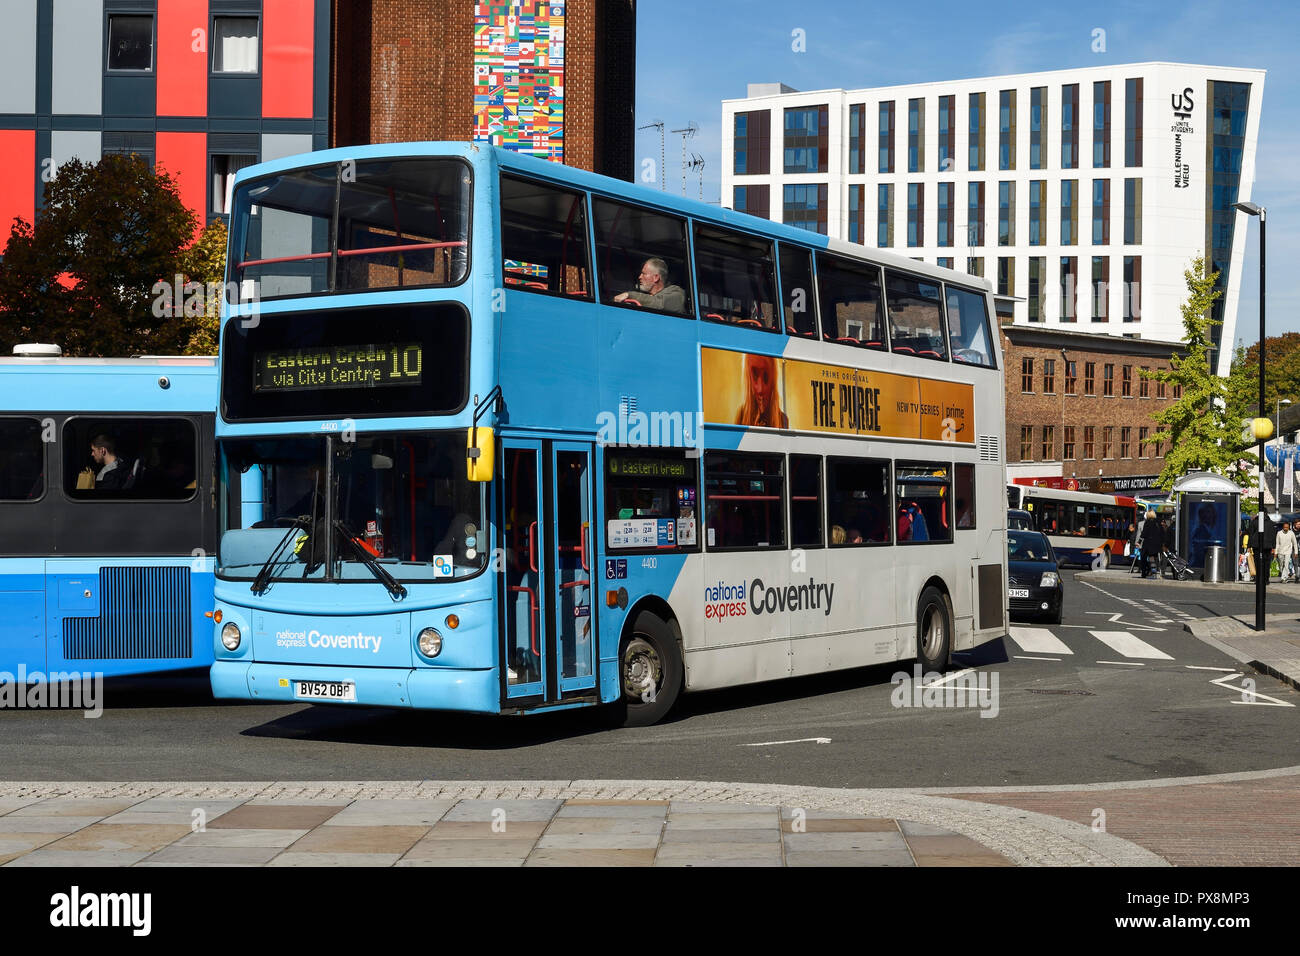 A National Express Coventry double decker bus on Trinity Street in Coventry city centre UK Stock Photo